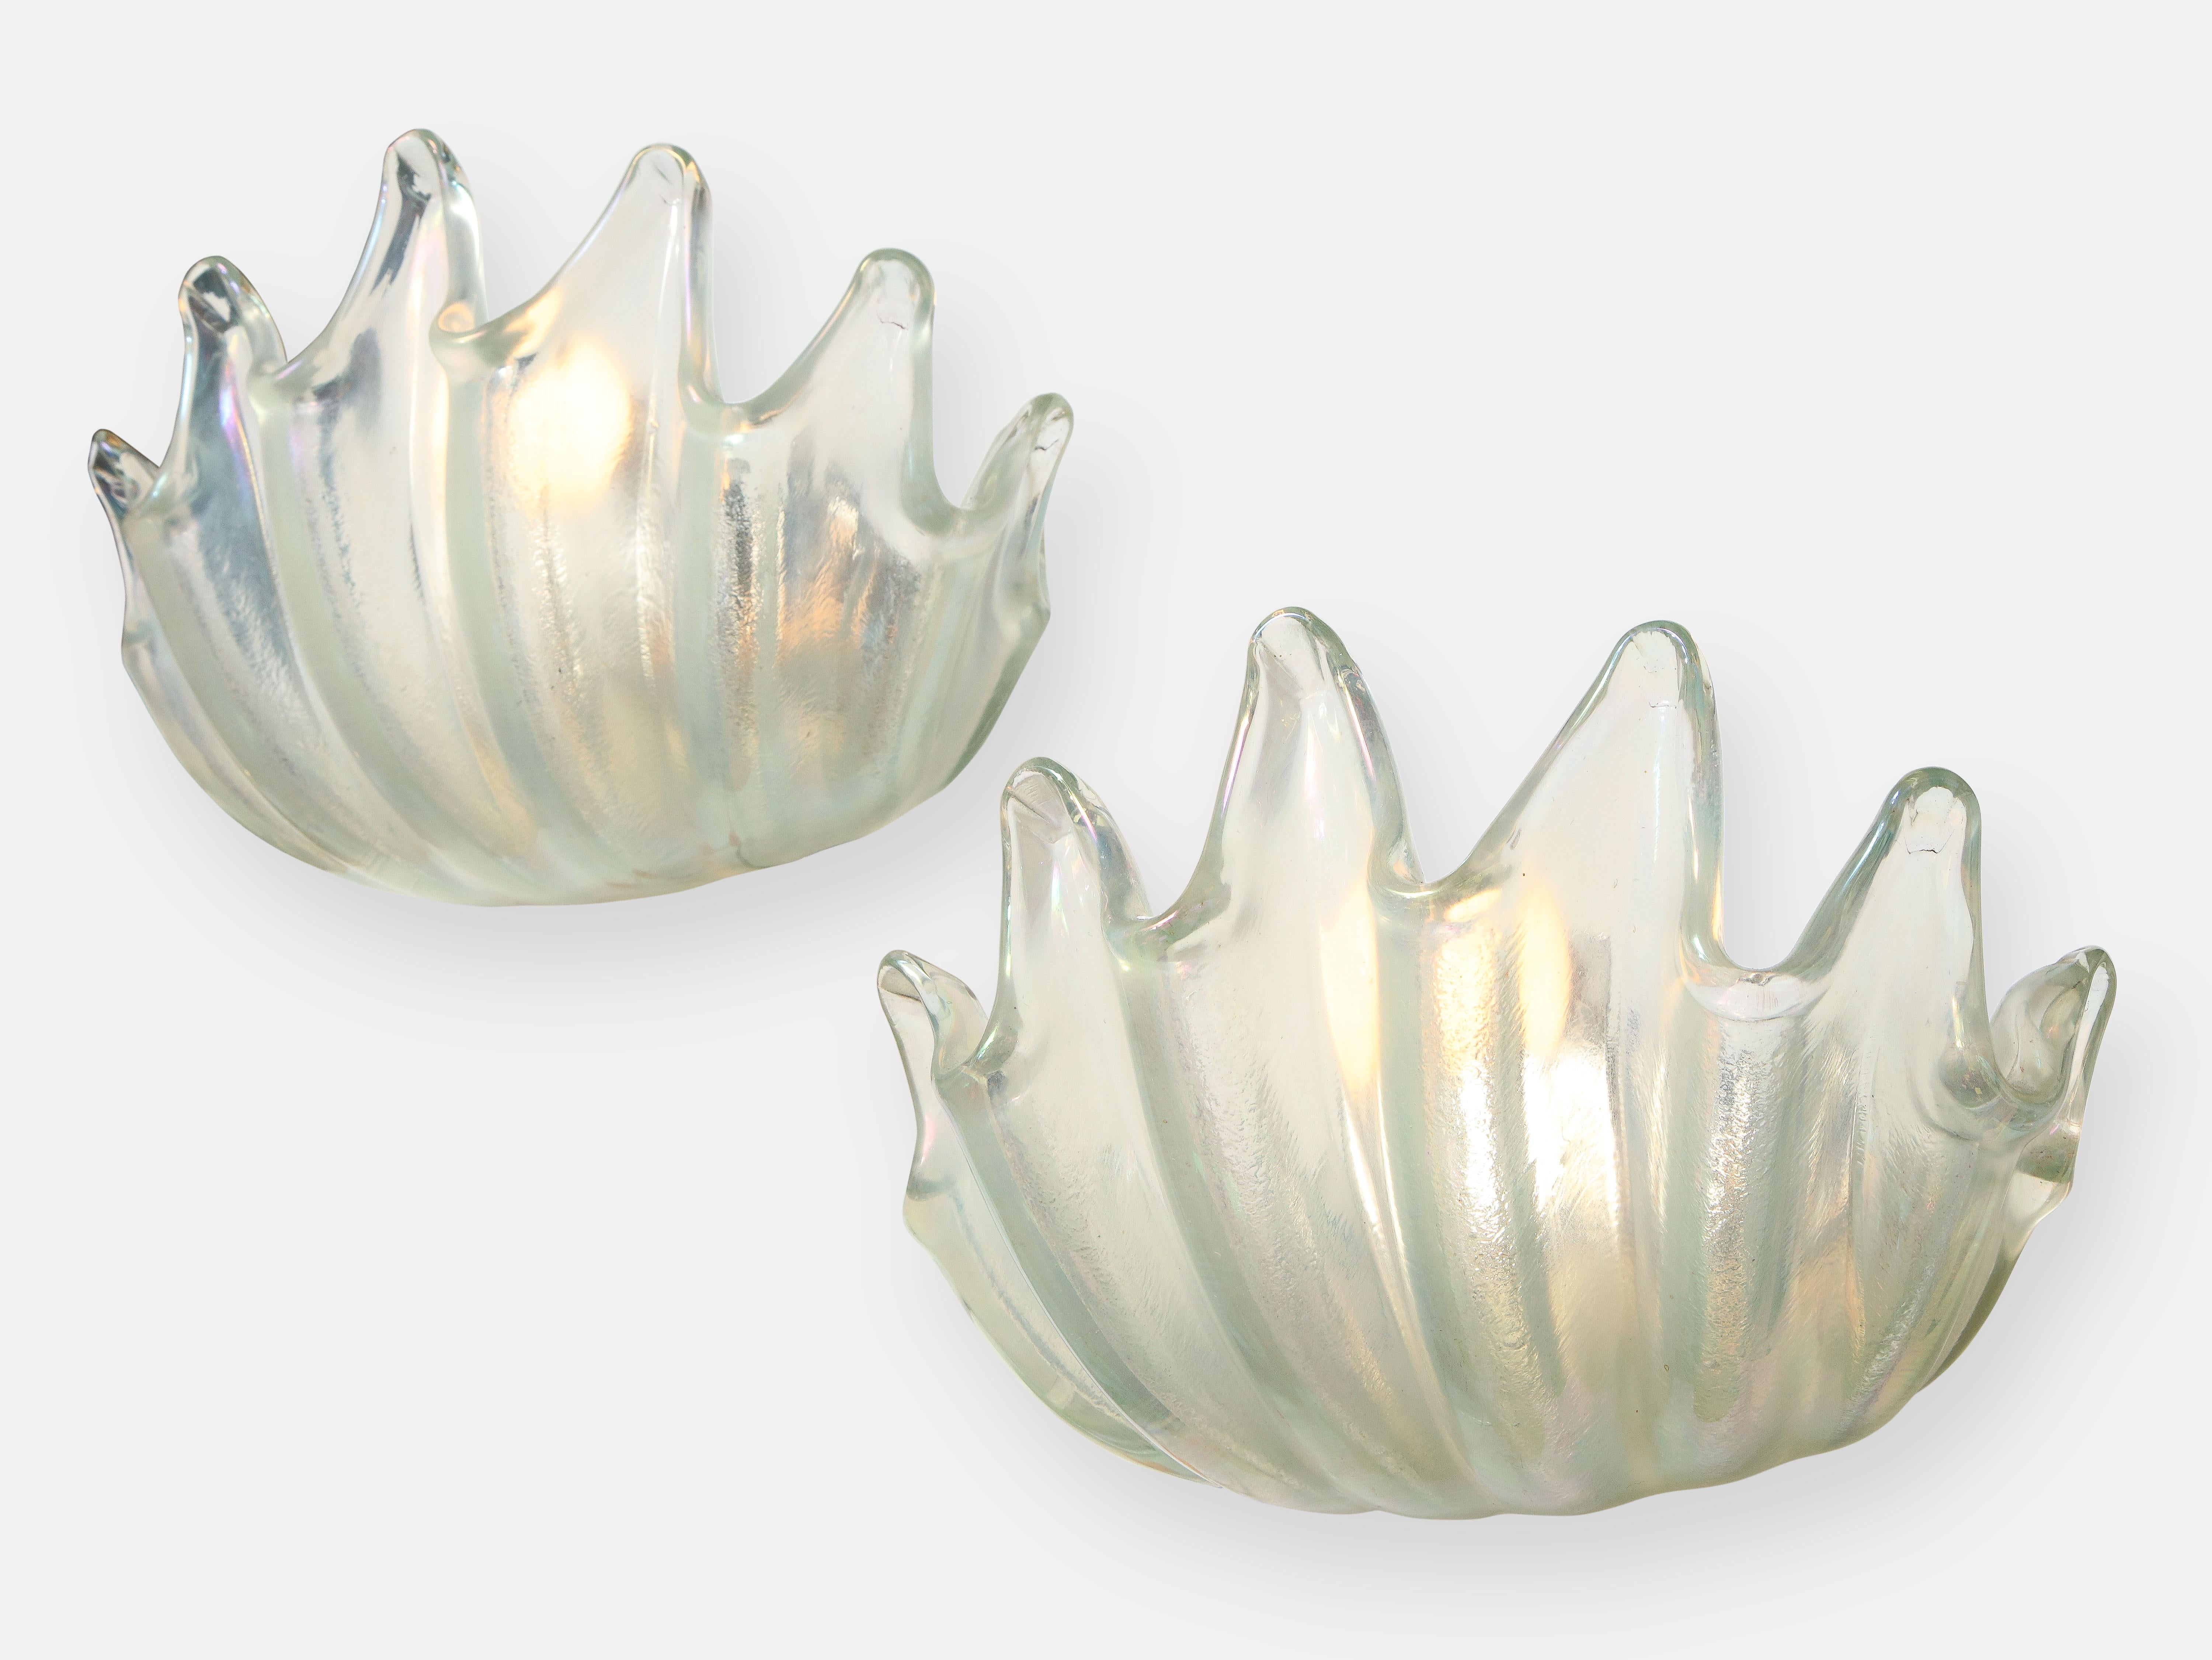 Ercole Barovier for Barovier & Toso extremely rare set of four large clamshell sconces in heavy transparent iridescent glass featuring deep ribbing and pronounced lobes, Italy, circa 1940. These exquisite crystal wall lights are elegant and